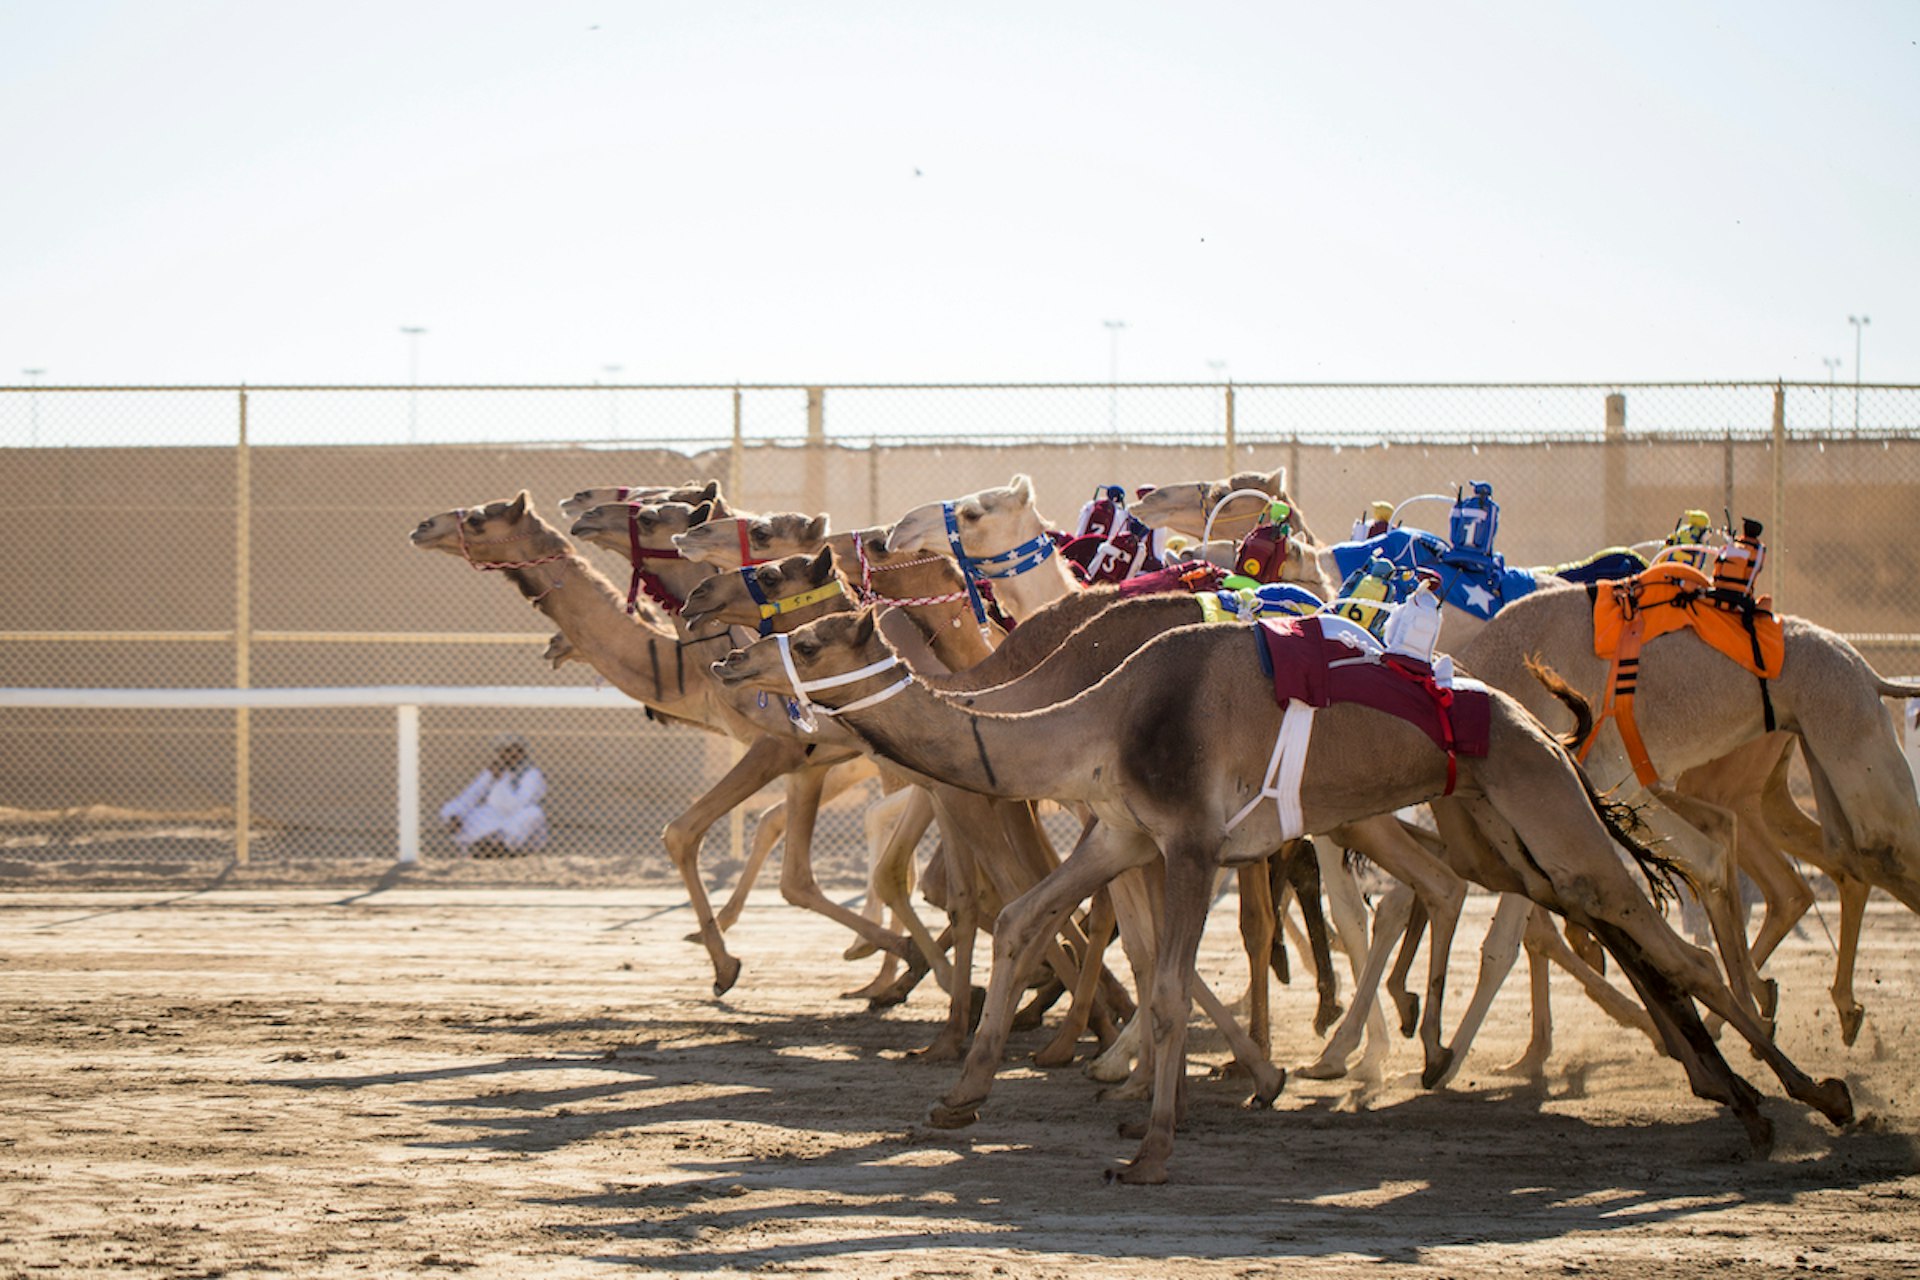 Camels leave the starting gate a race in the desert, Qatar, Middle East